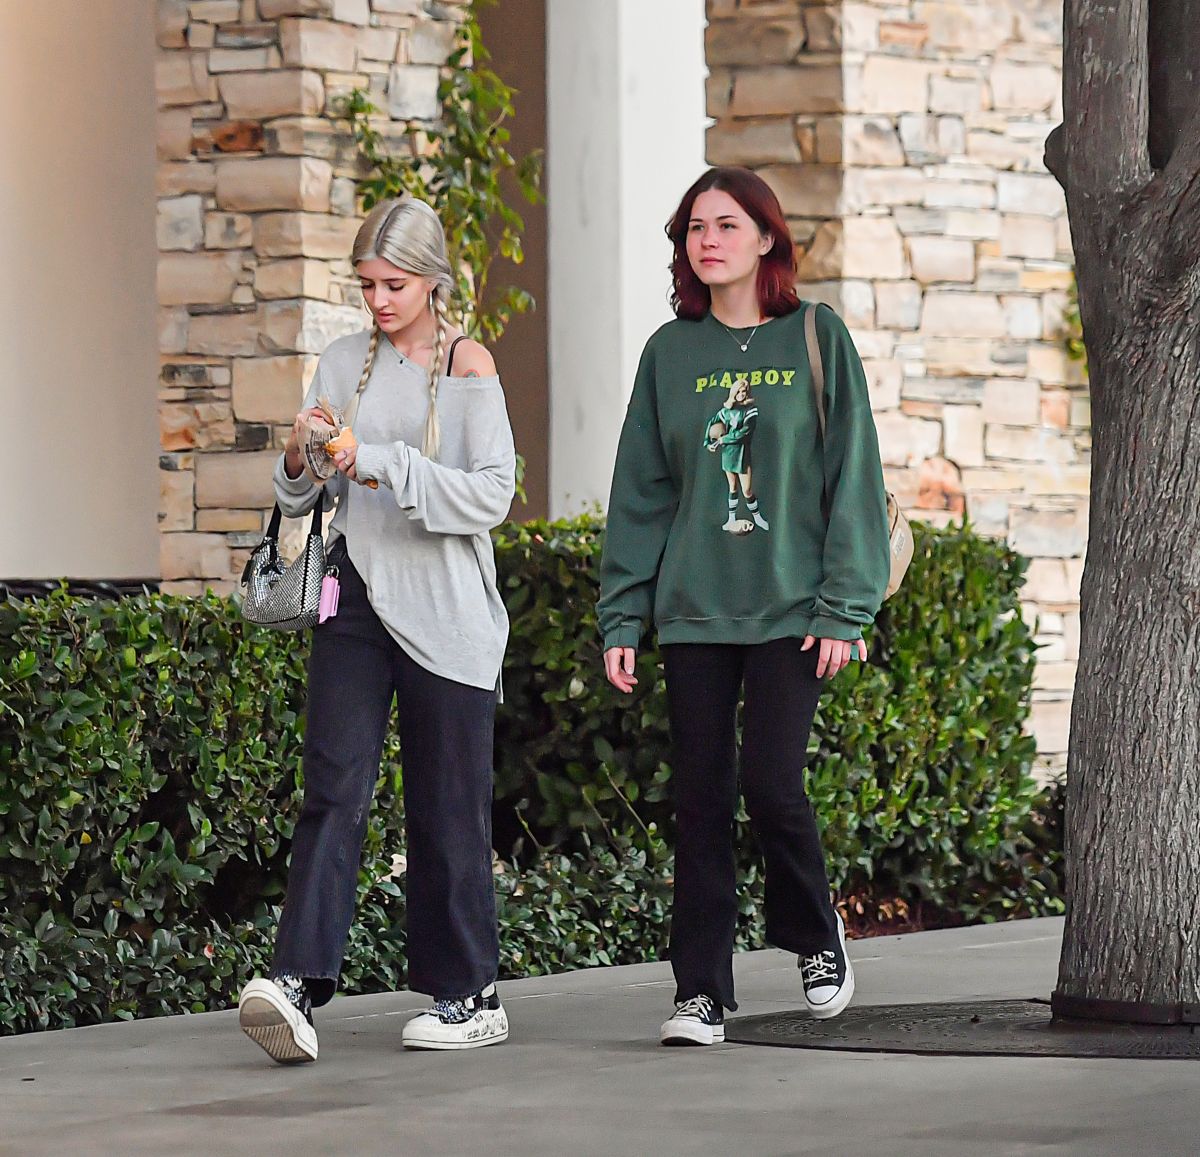 SAMI SHEEN Out for Ice Cream with a Friend in Calabasas 09/01/2022.